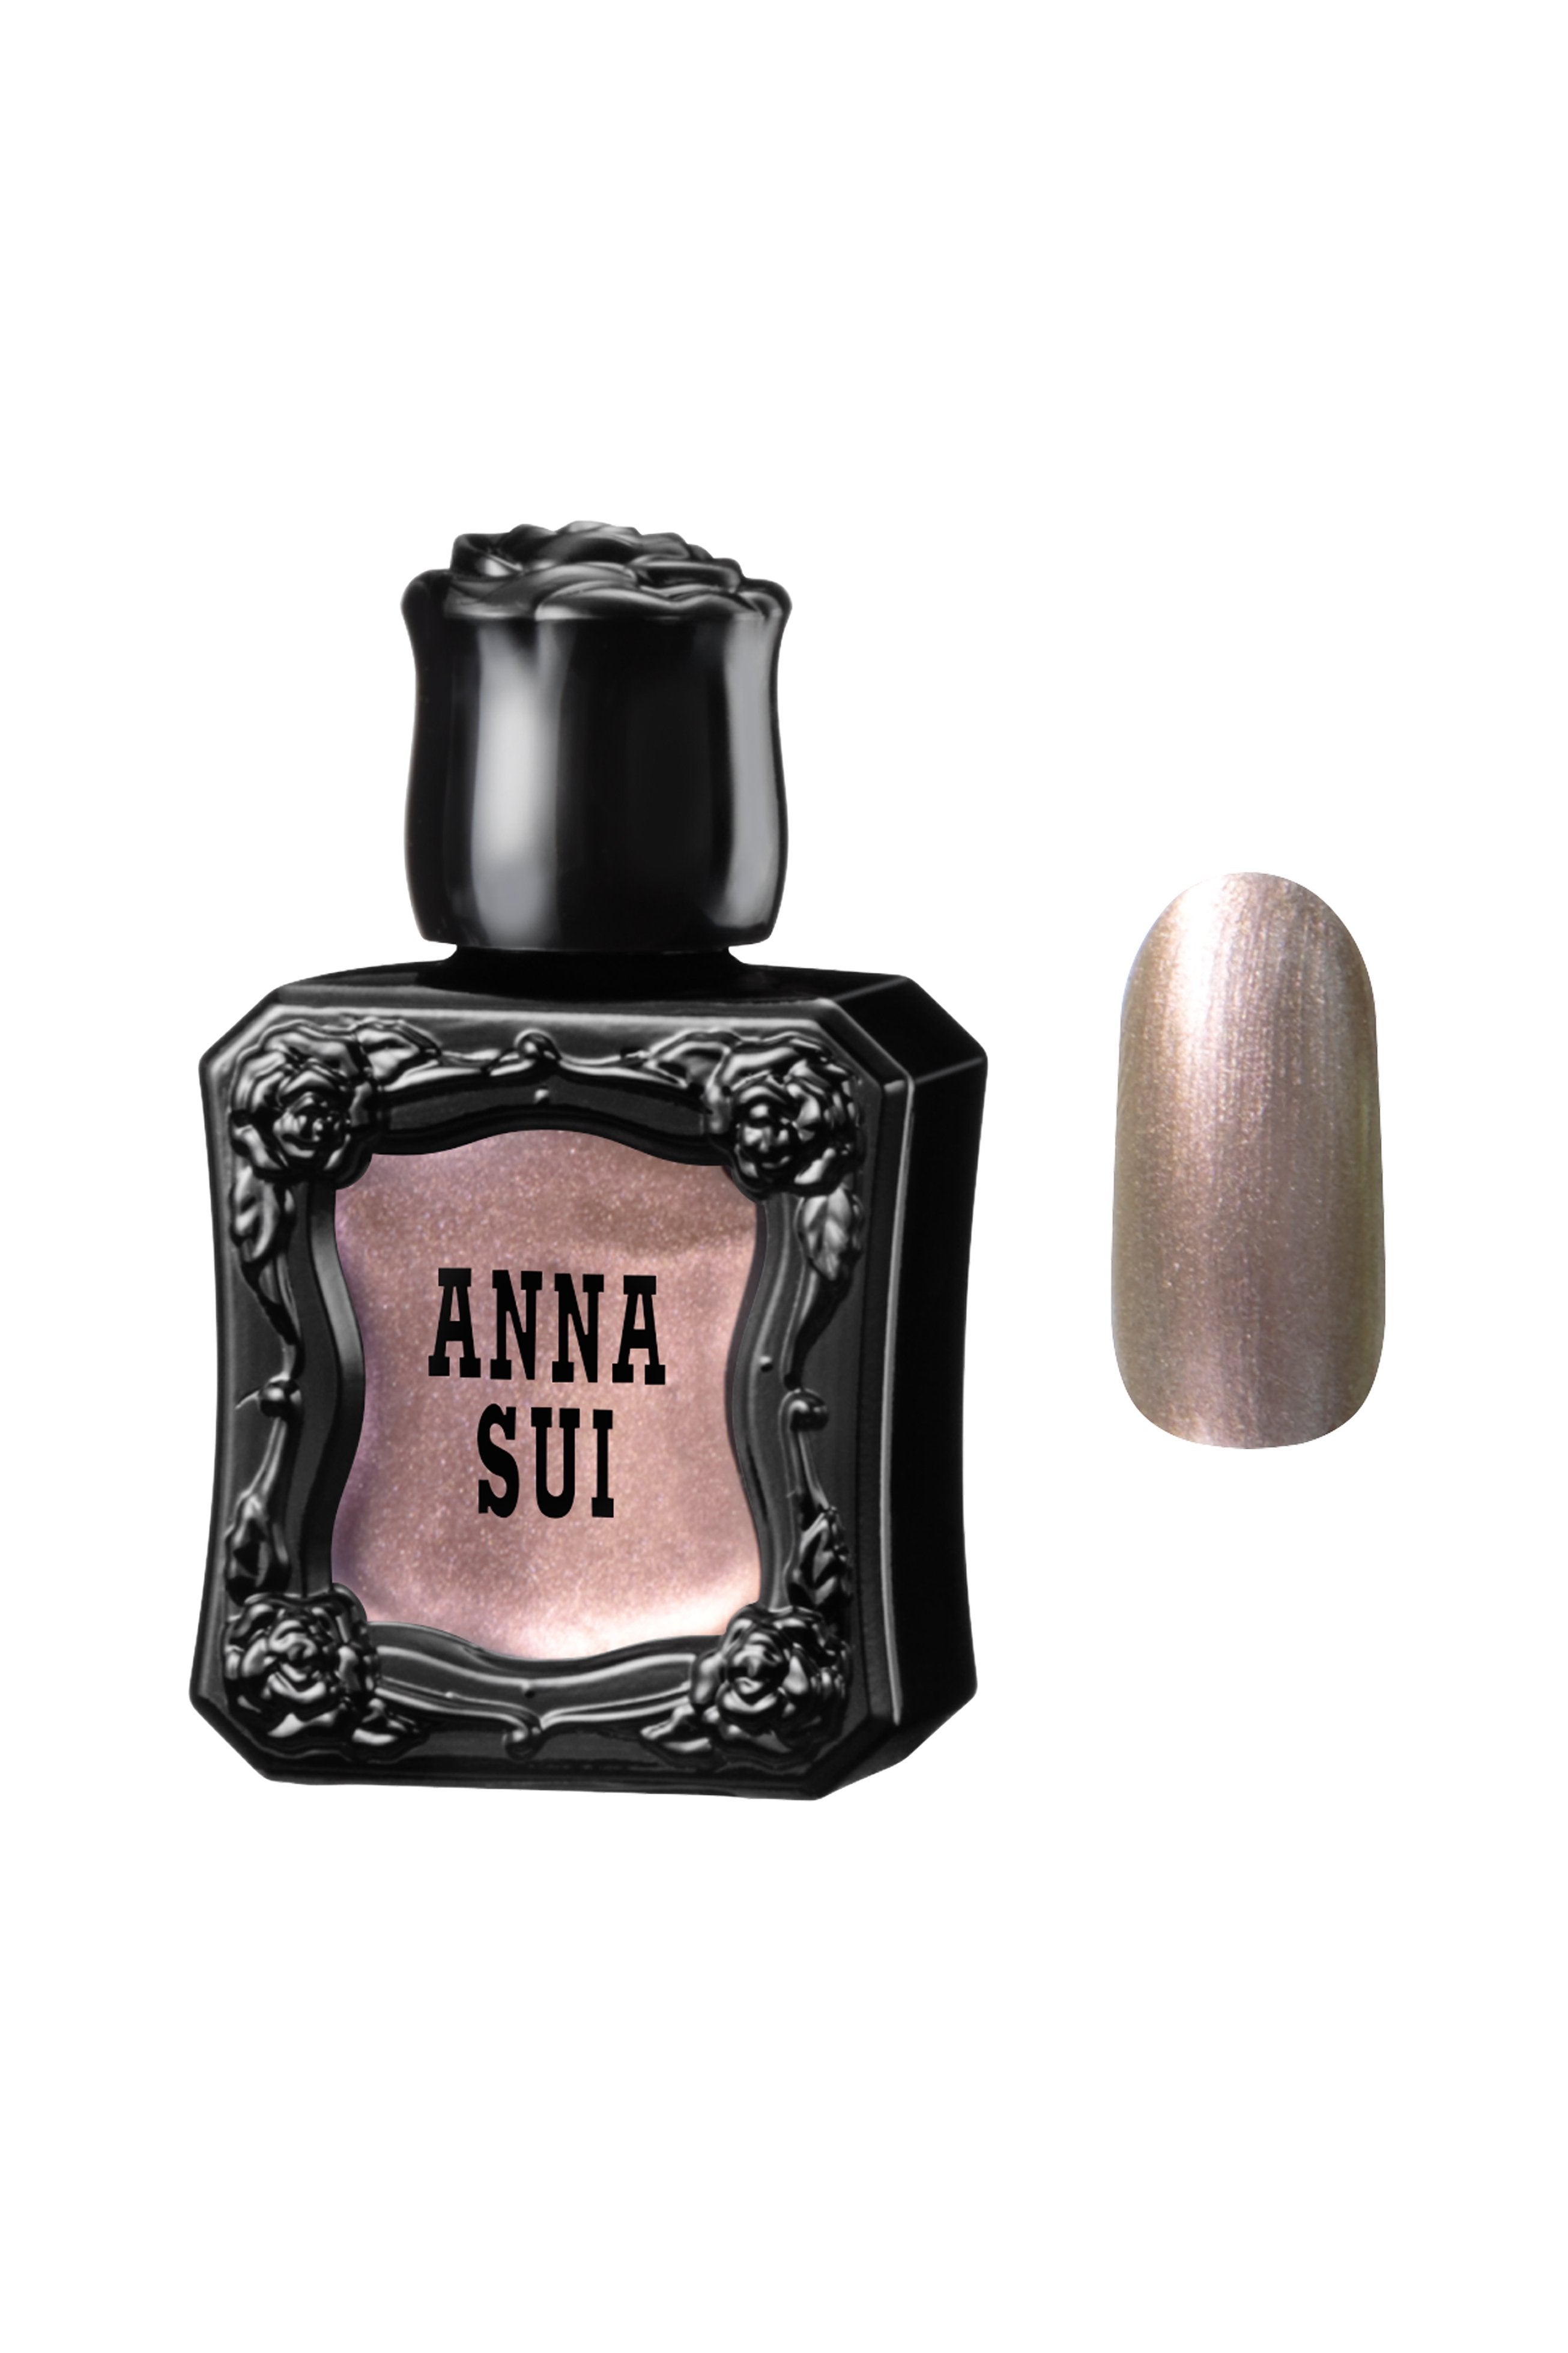 COPPER BROWN Nail Polish bottles, with raised rose pattern, Anna Sui in black over nail colors in bottle front